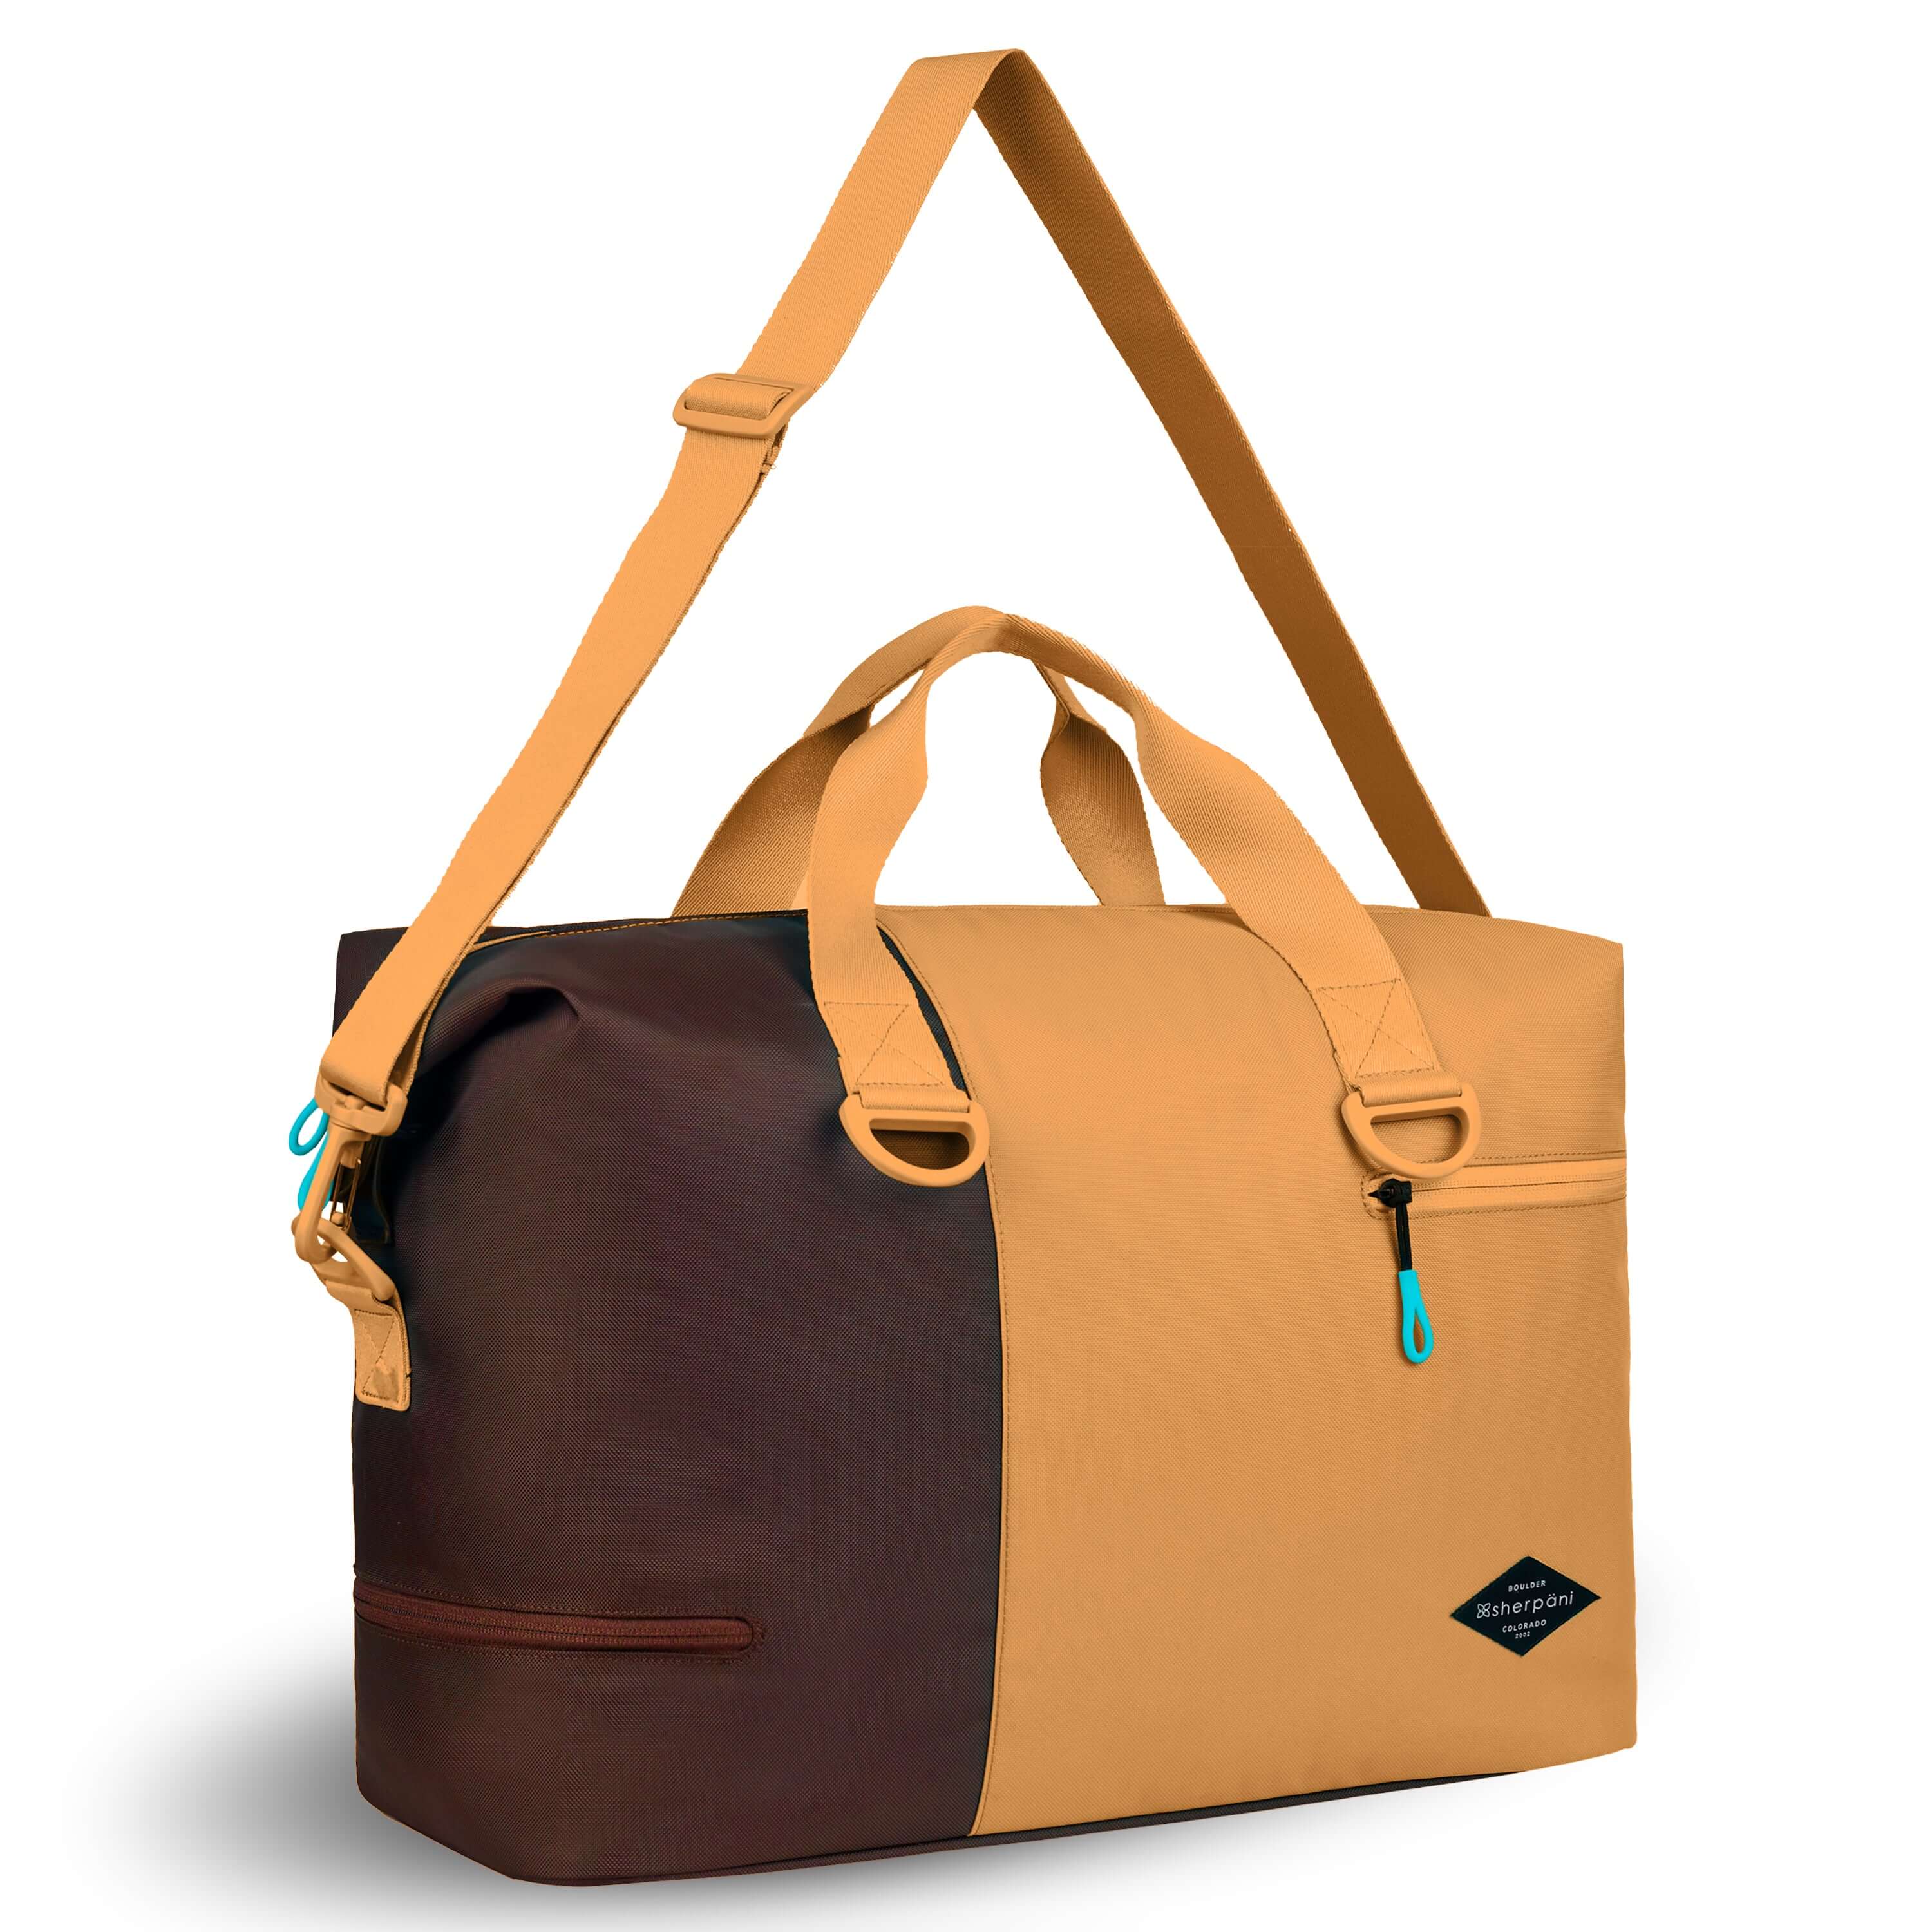 Angled front view of Sherpani bag, the Sola in Sundial. The bag is two-toned in burnt yellow and brown. Two external zipper compartments are visible on the top right and bottom left of the bag. Easy-pull zippers are accented in aqua. The bag has tote handles and an adjustable/detachable crossbody strap. #color_sundial